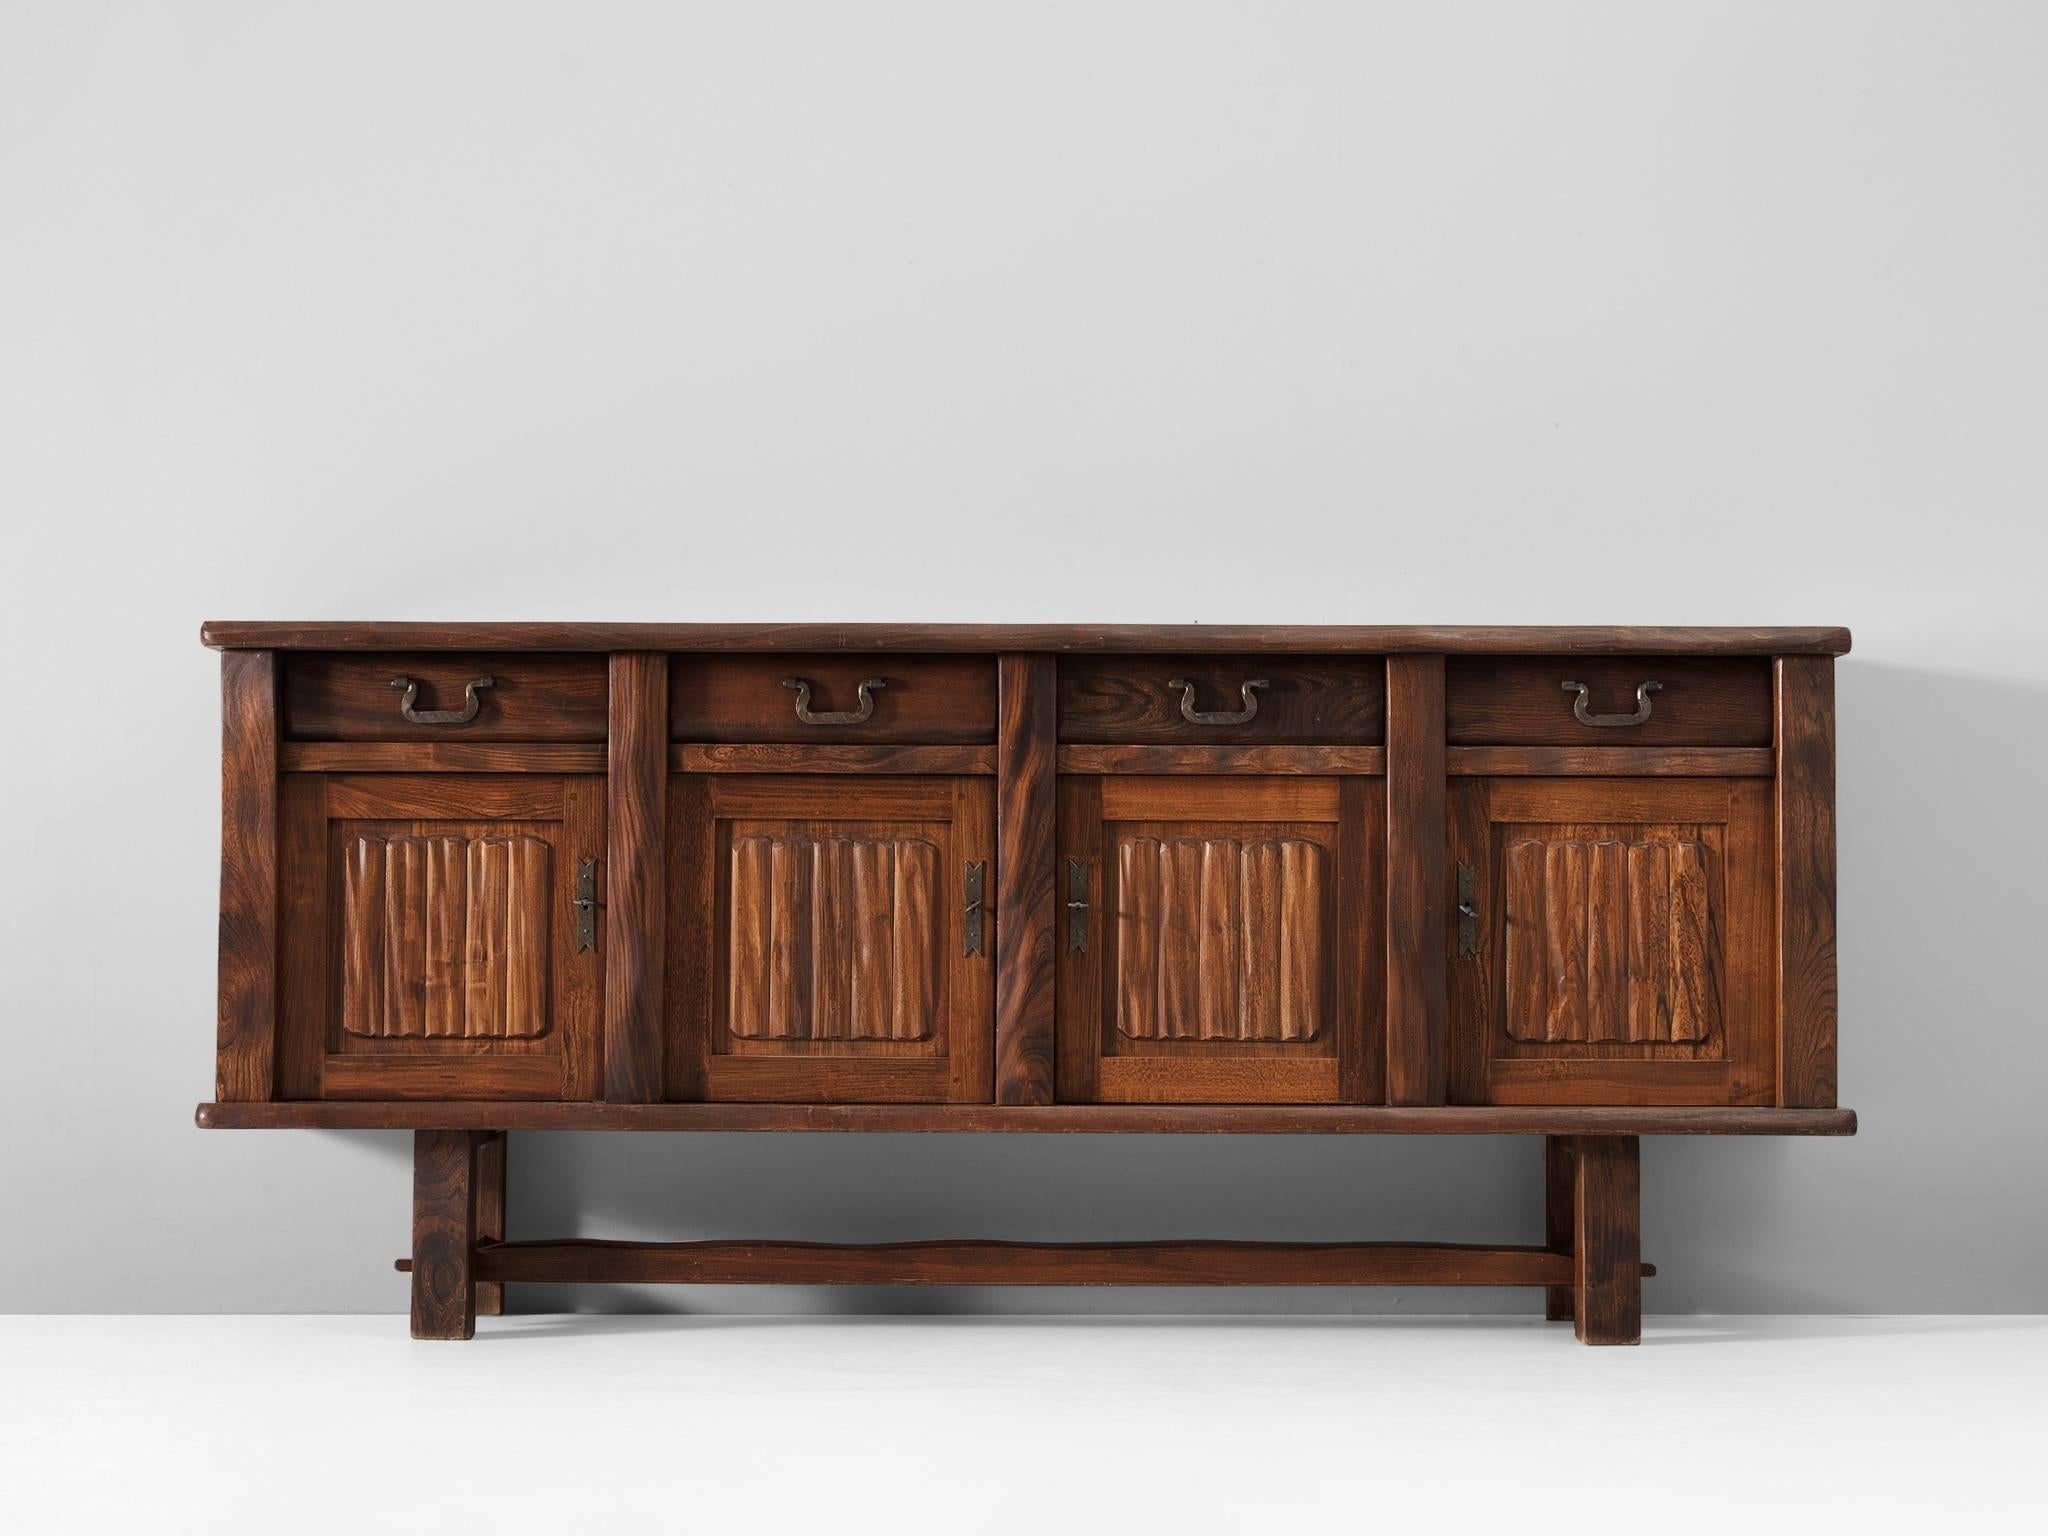 Sideboard in elm by Olavi Hanninen for Mikko Nupponnen, Finland, 1958. 

Large credenza in solid elm. This credenza has a simplified design with high attention to the natural look and grain of the wood. Four door sideboard with shelves and drawers.